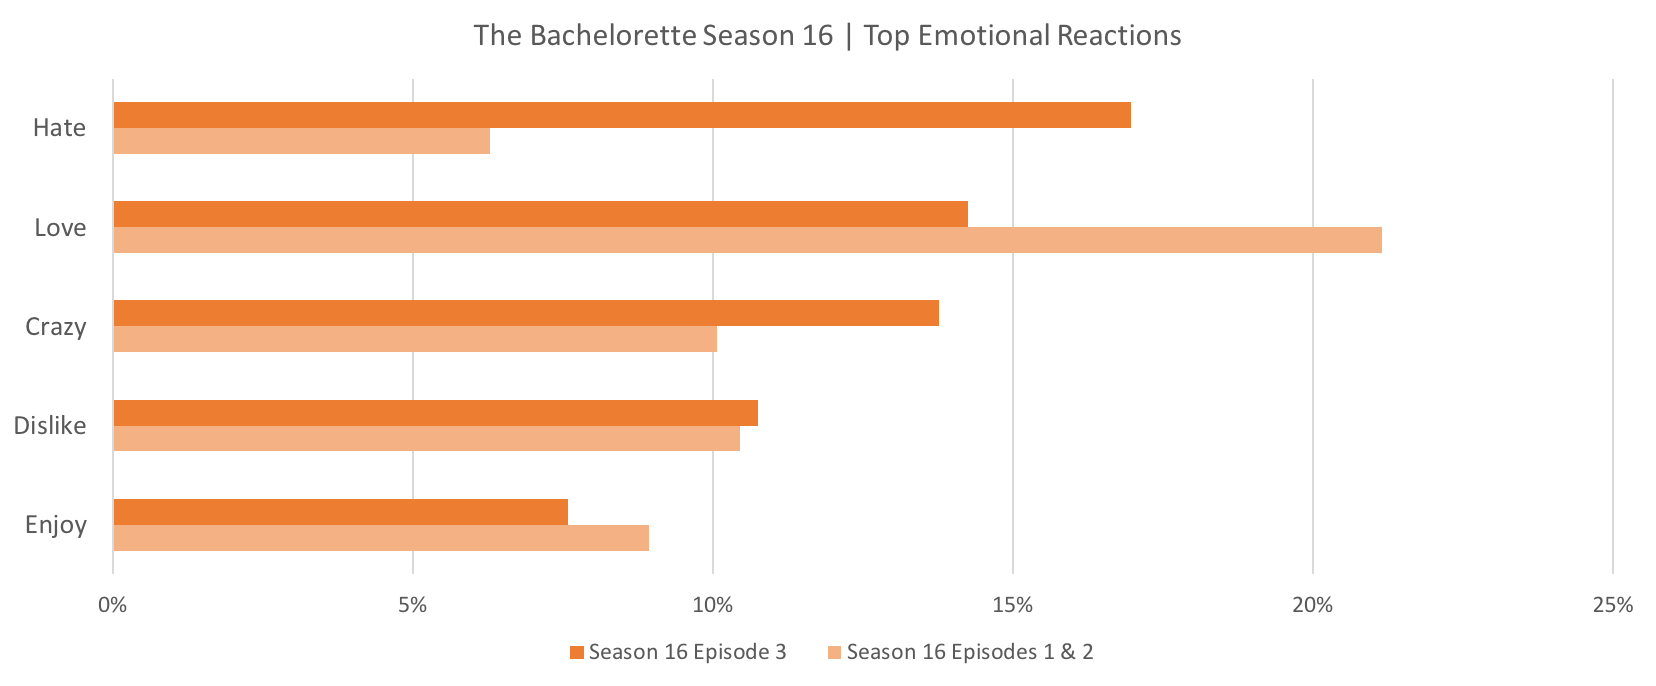 Source: Canvs Compare, The Bachelorette First 3 Episodes Airing Window + / - 3 Hours